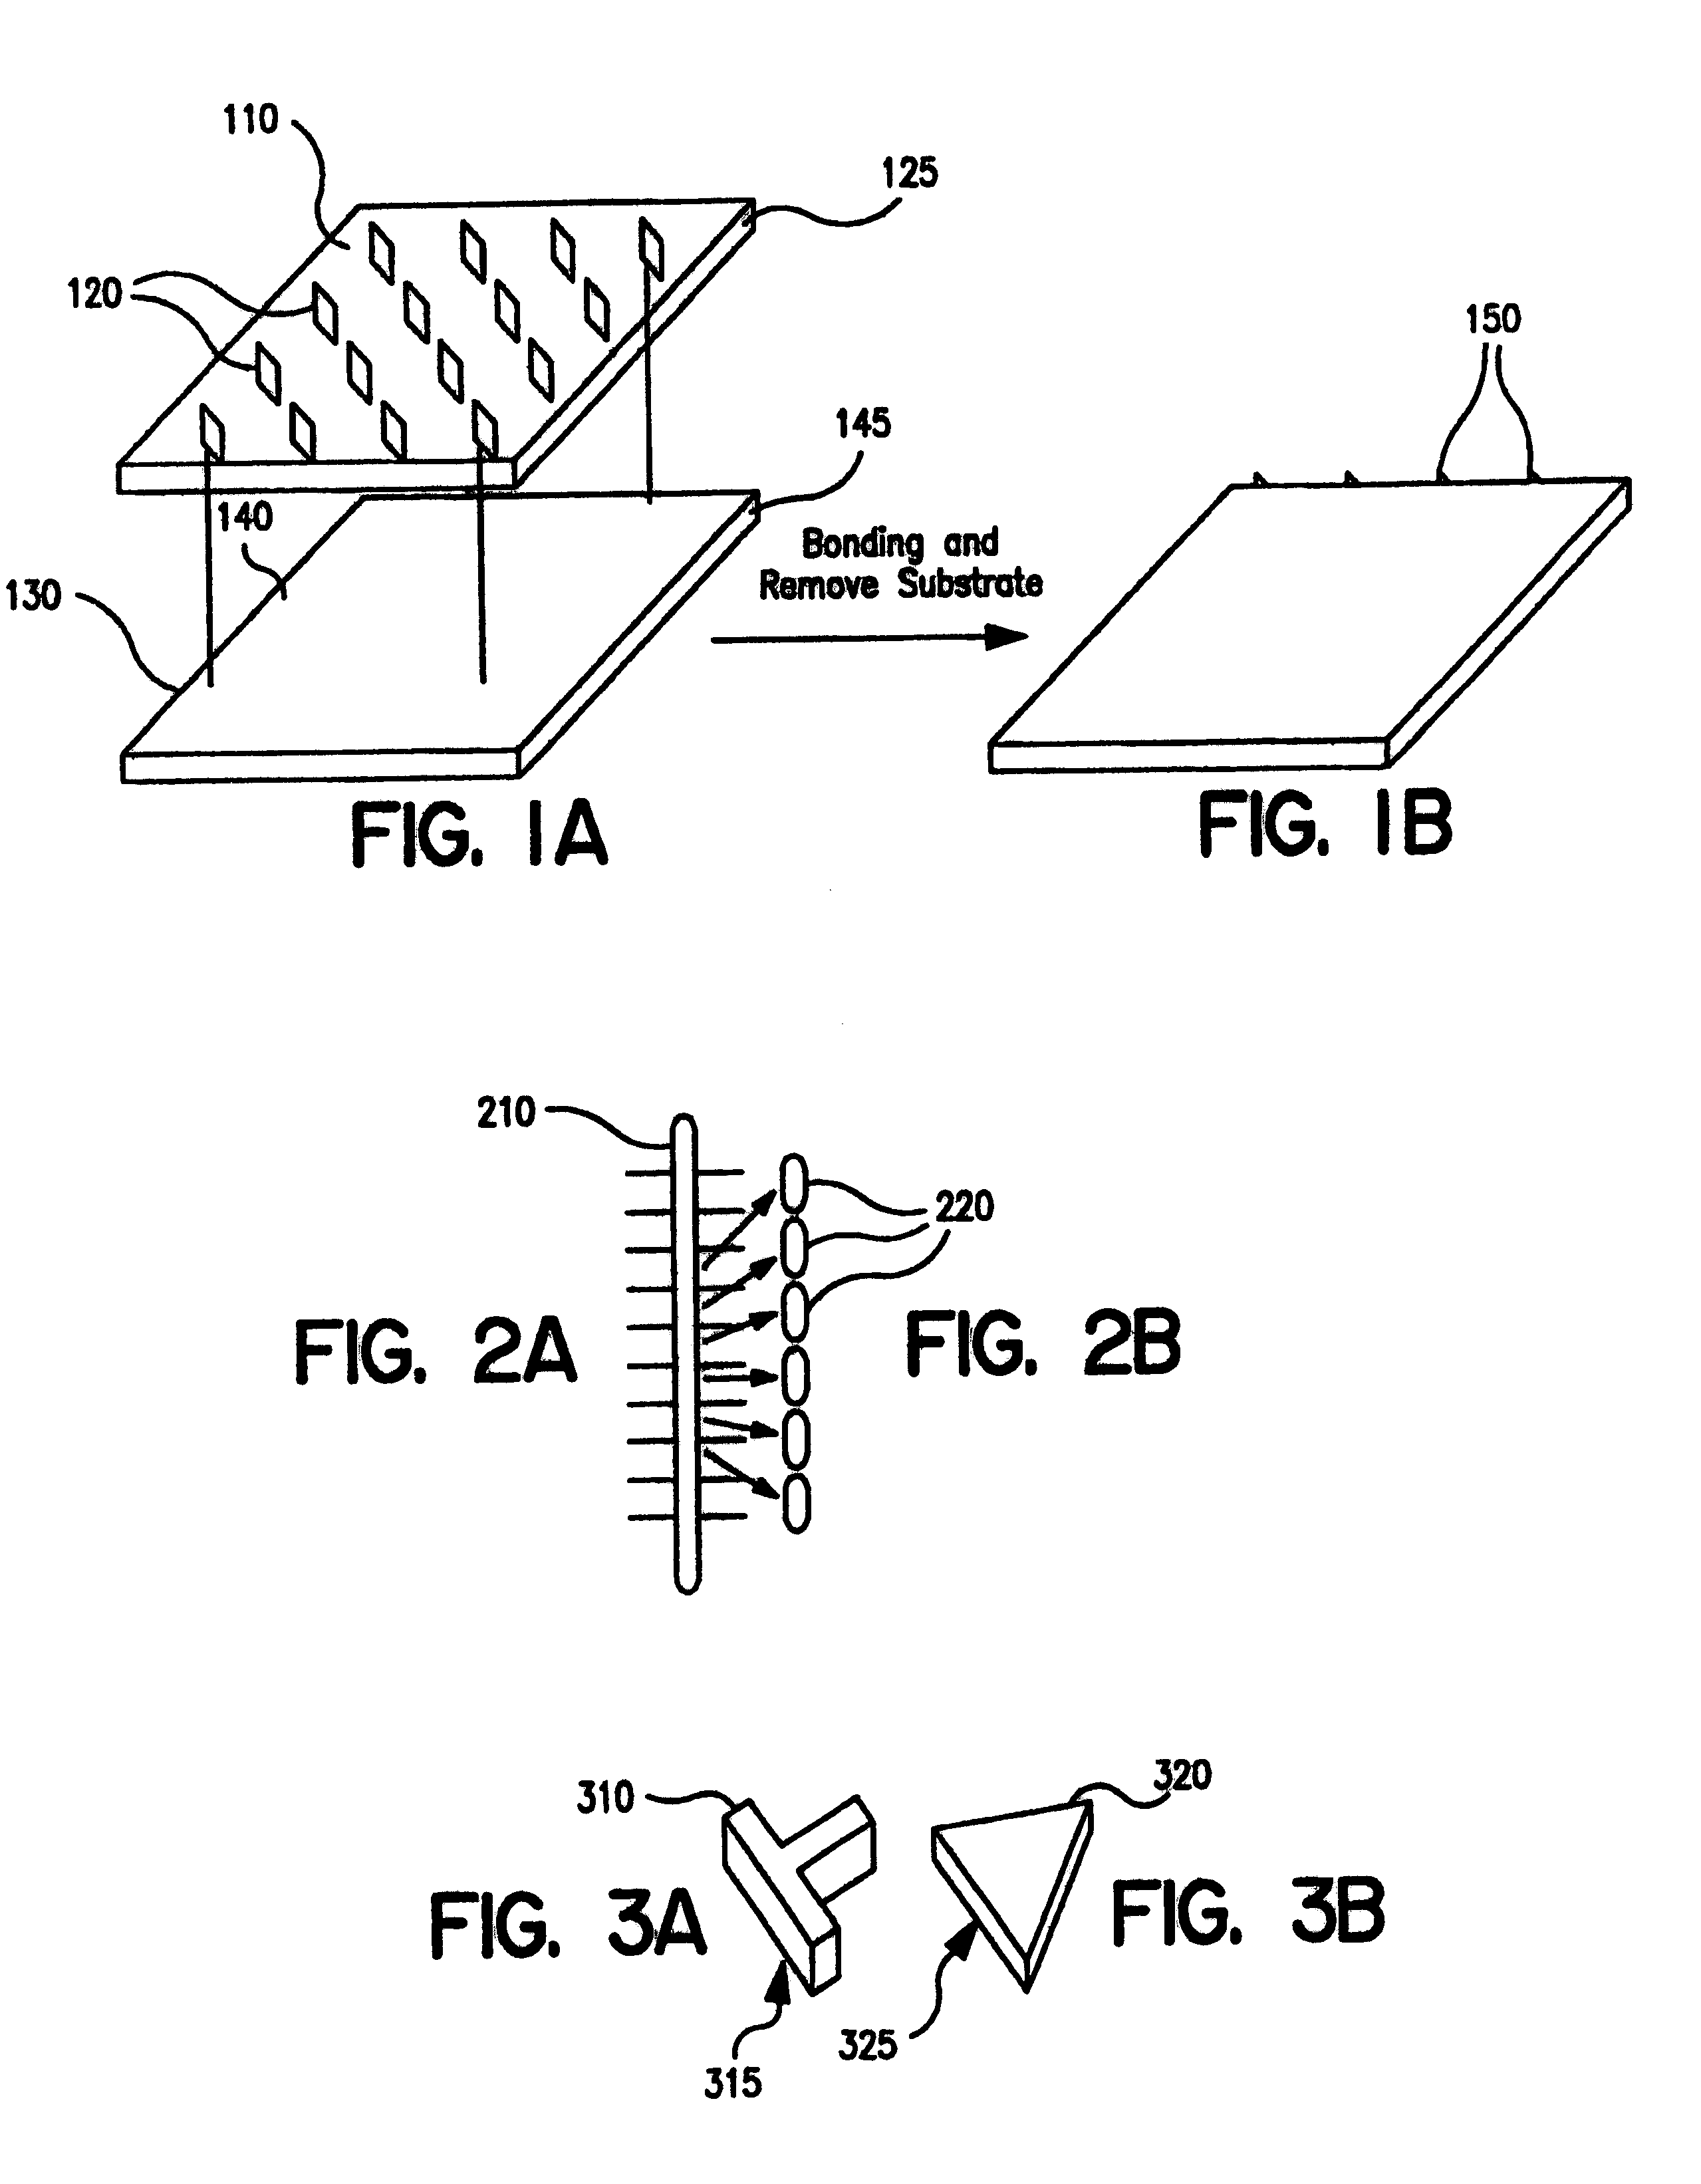 Micromachined optomechanical switching cell with parallel plate actuator and on-chip power monitoring